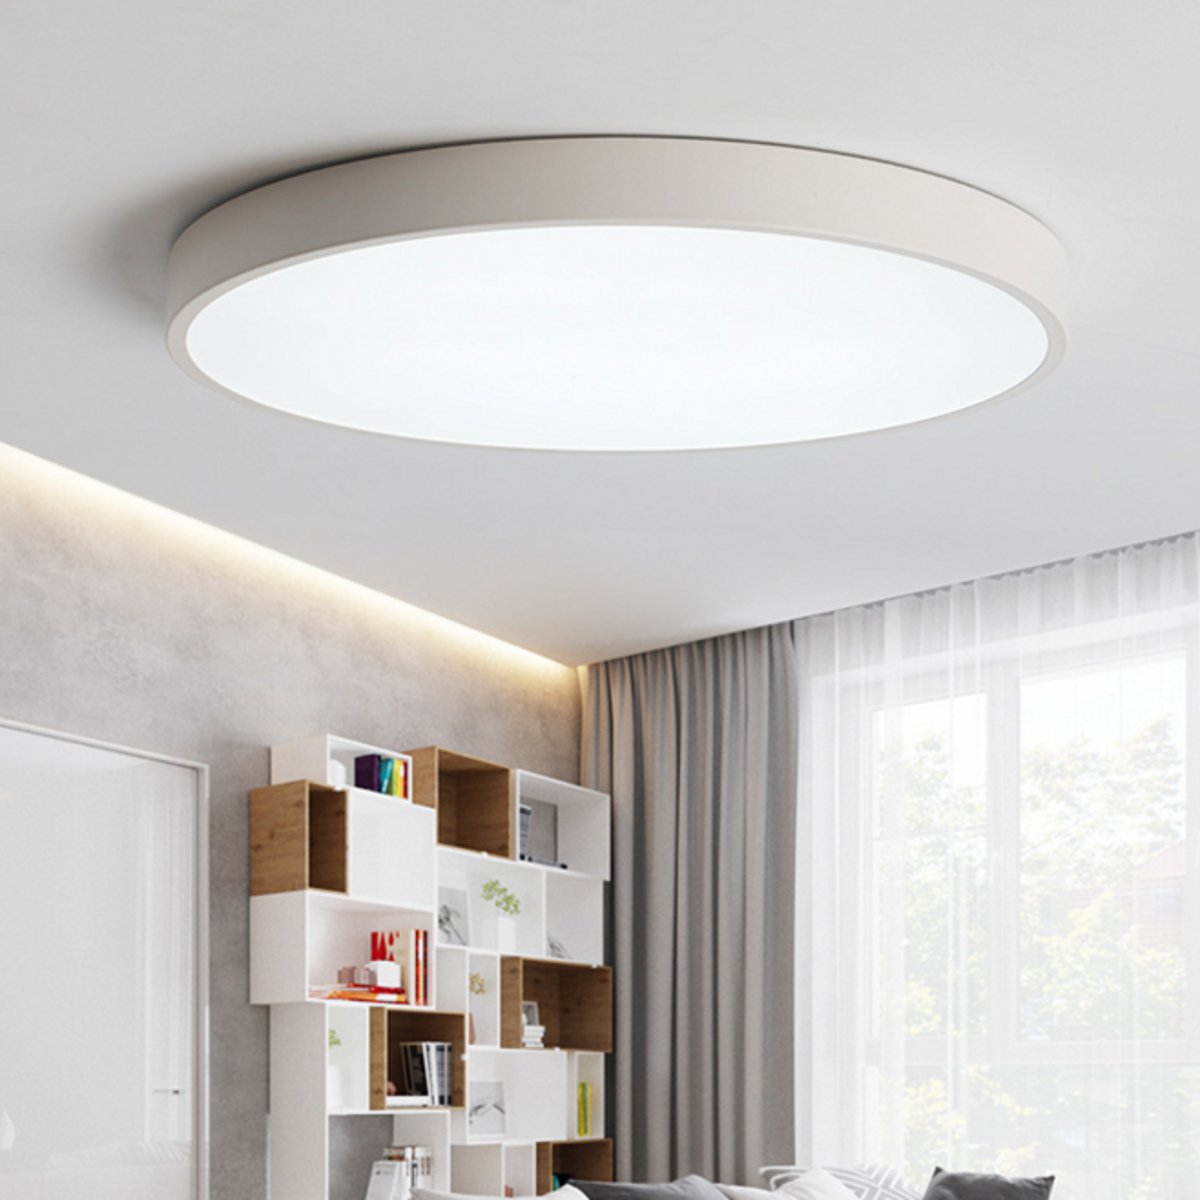 AC220V-18W-Dimming-LED-Ceiling-Down-Light-Remote-Control-Bedroom-Lamp-Living-Room-Mount-Fixture-1709815-3